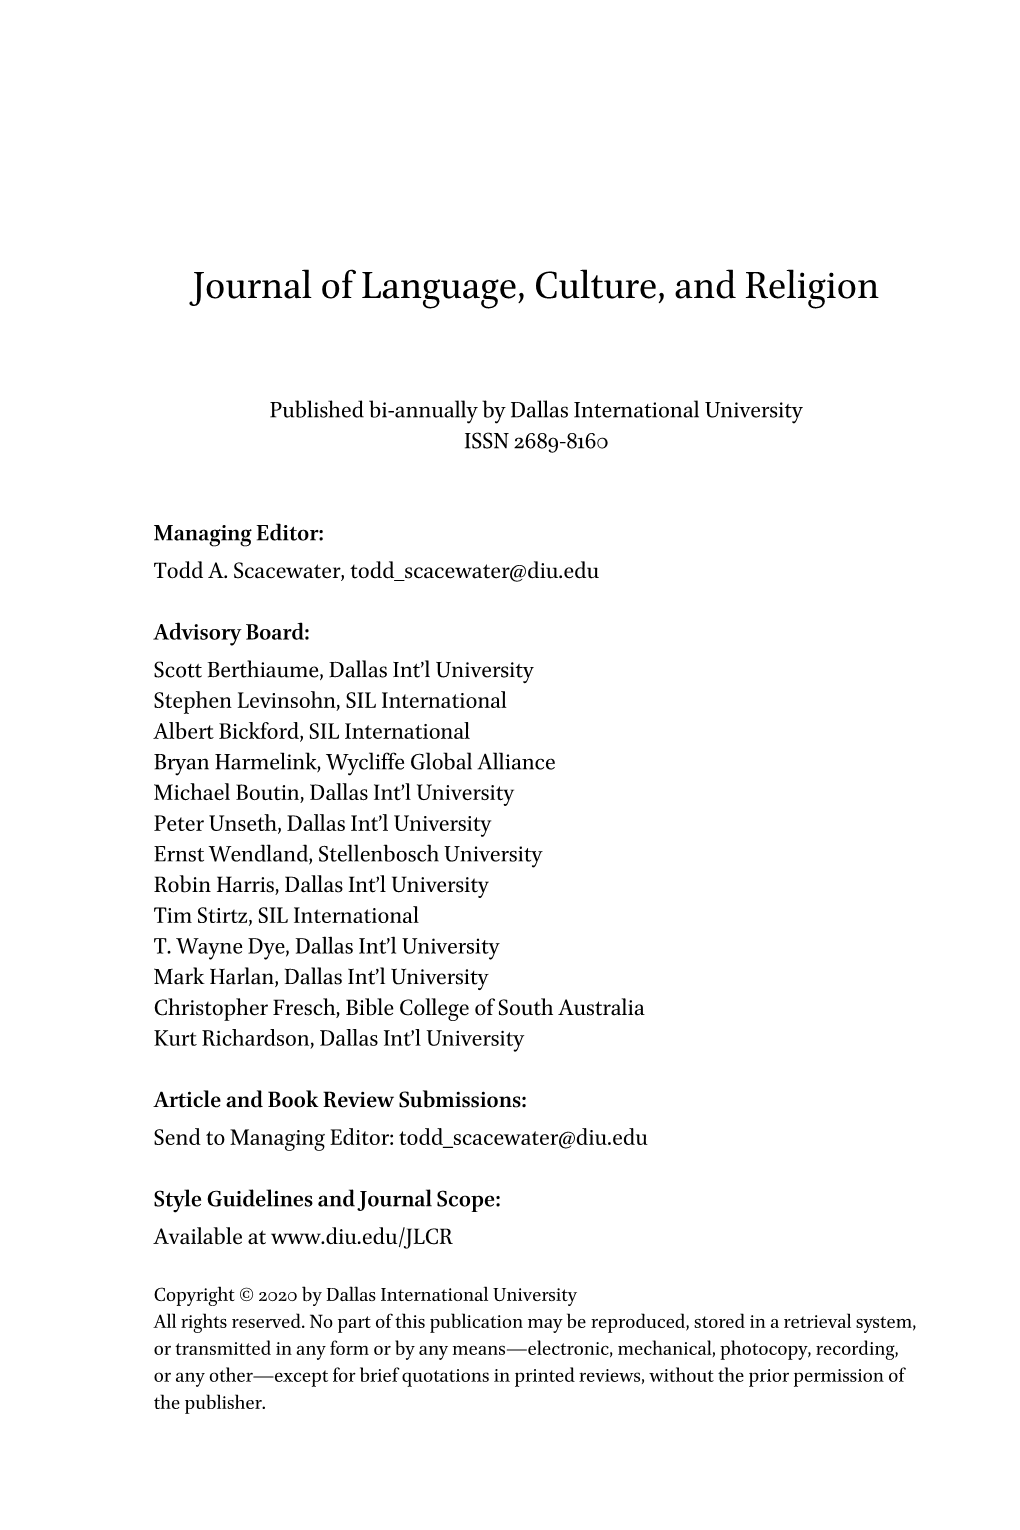 Journal of Language, Culture, and Religion